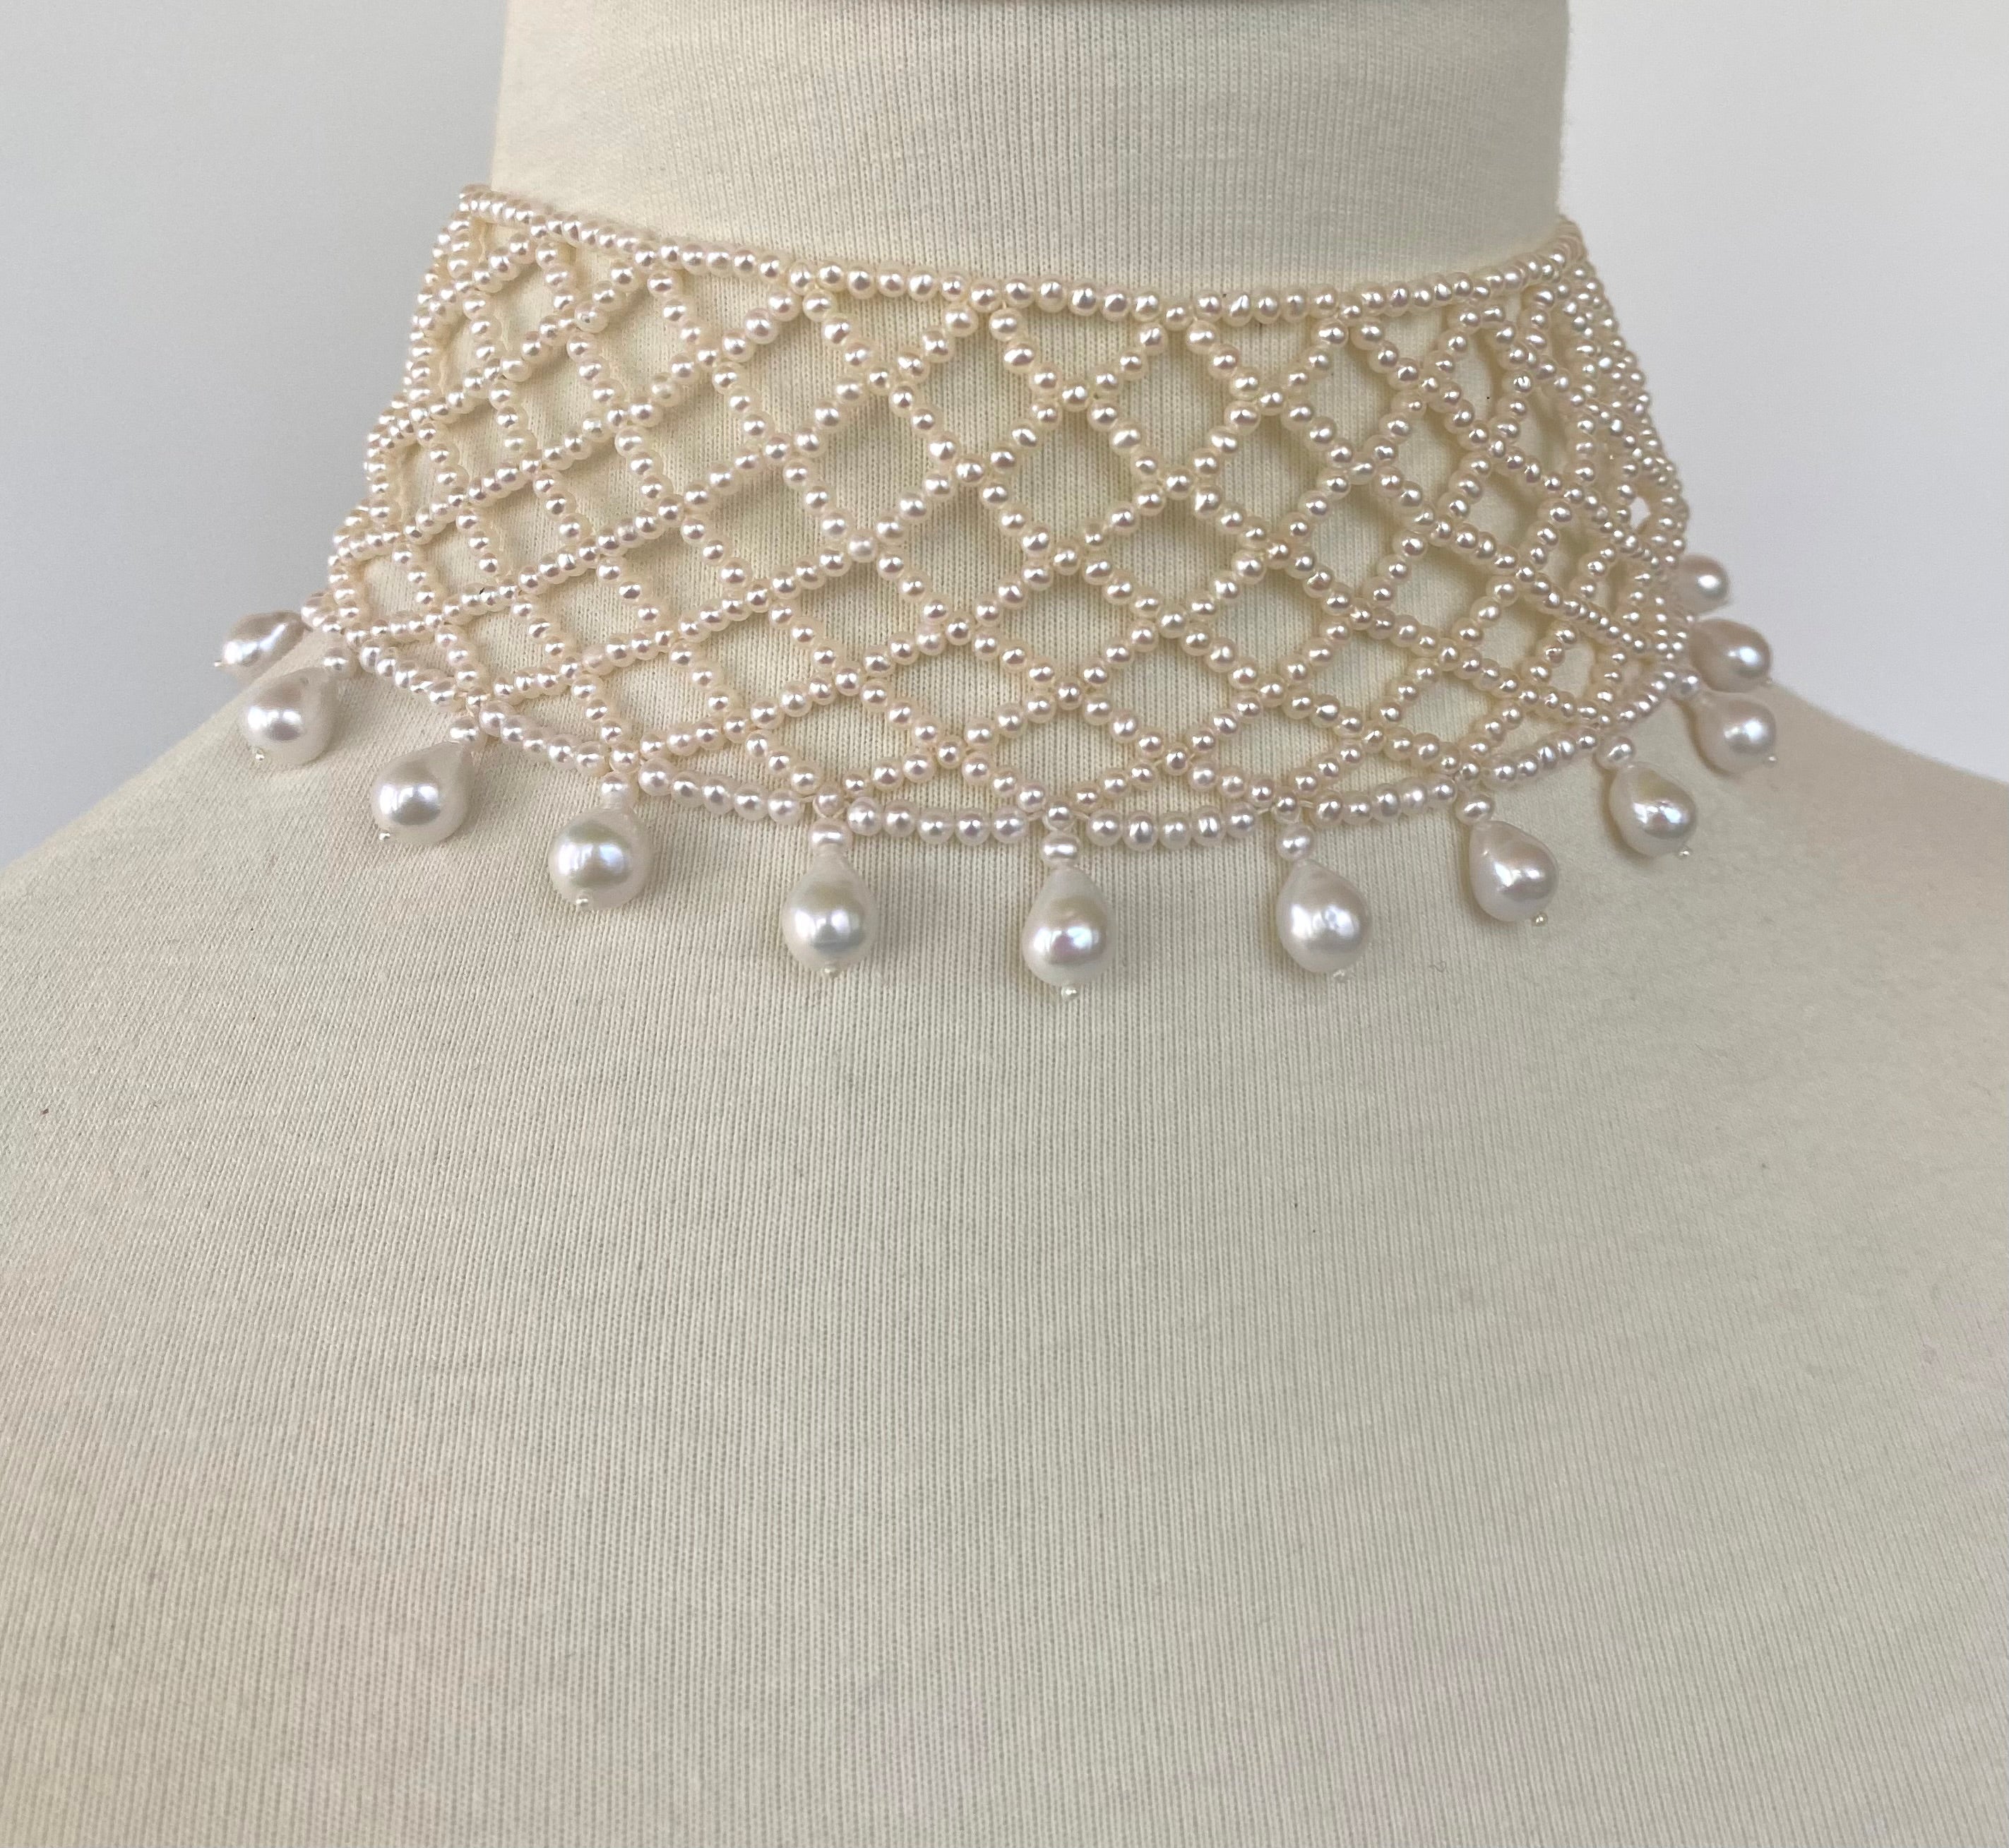 Gorgeous Choker by Marina J. This Stunning  Edwardian inspired Choker Featured cultured 2.5-3 mm Pearls intricately woven together into a Crossed Lace like design. Beautiful cultured pearl drops, hang from bottom of the Choker giving an enhanced